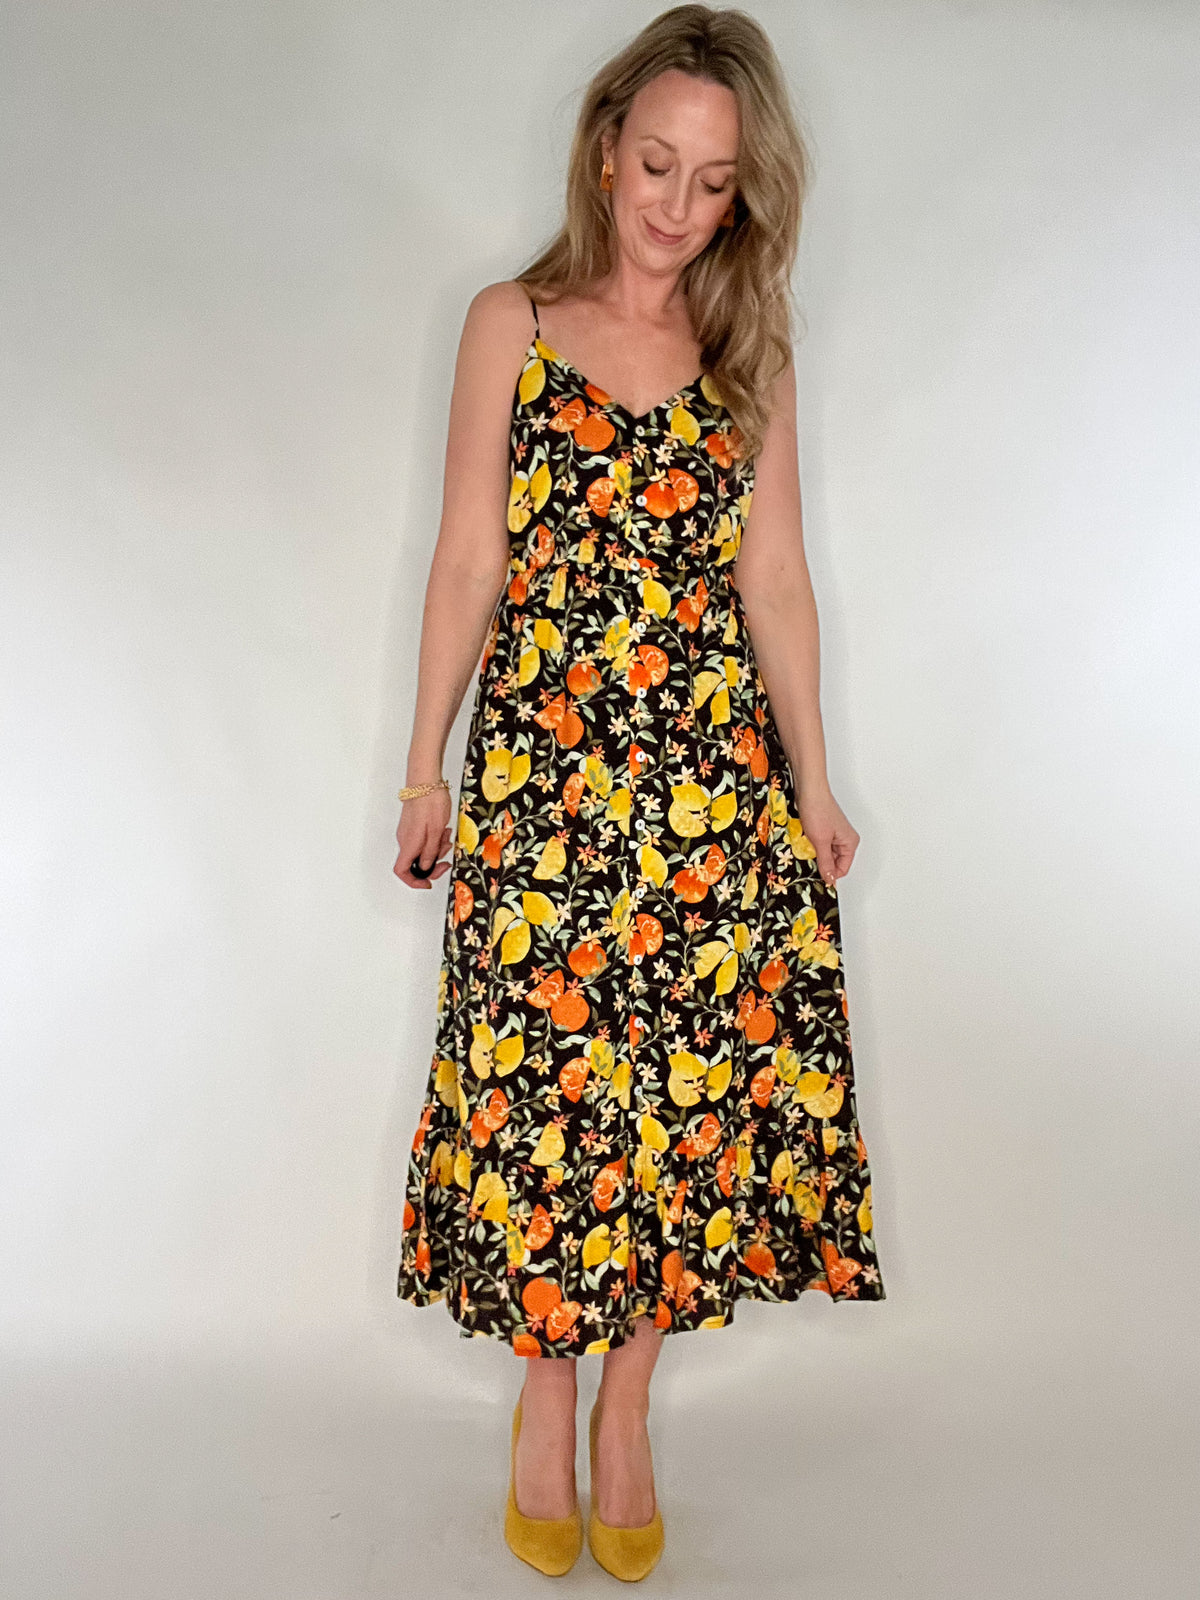 Make a bold statement in our Citrus Punch Maxi Dress. Featuring a playful citrus print, this adjustable spaghetti strap dress is perfect for any occasion. The tiered skirt adds a feminine touch while the button front and elastic waist provide a flattering fit. Fully lined to the knees for ultimate comfort and style.